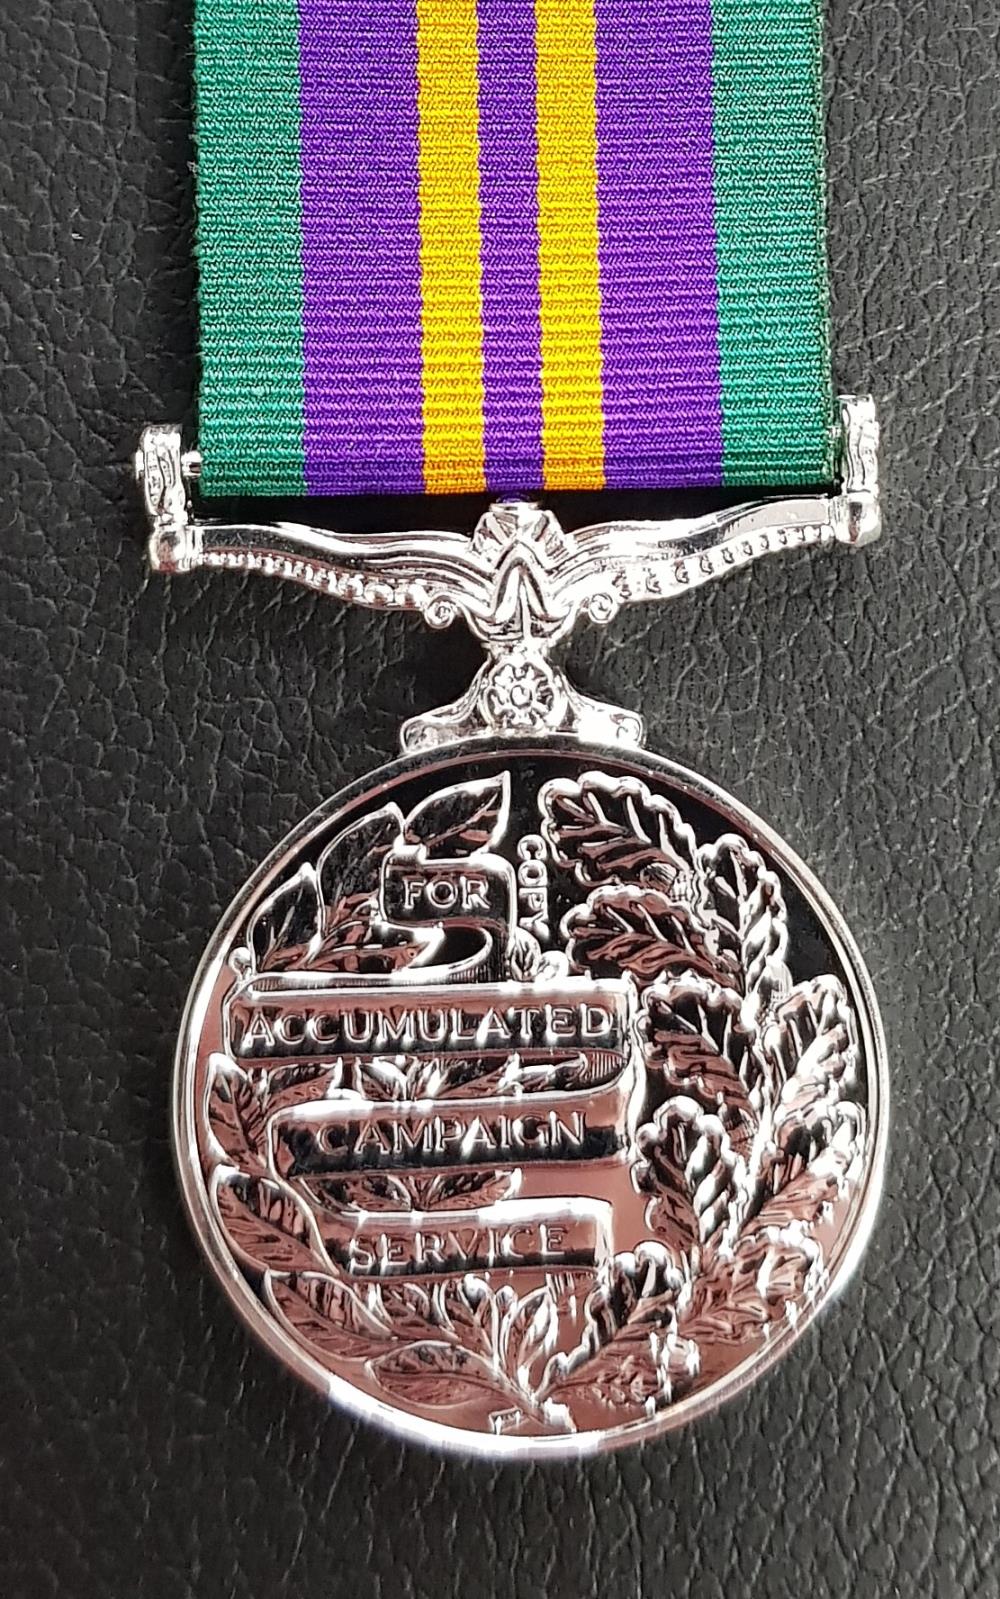 Accumulated Campaign Service Medal (2011)